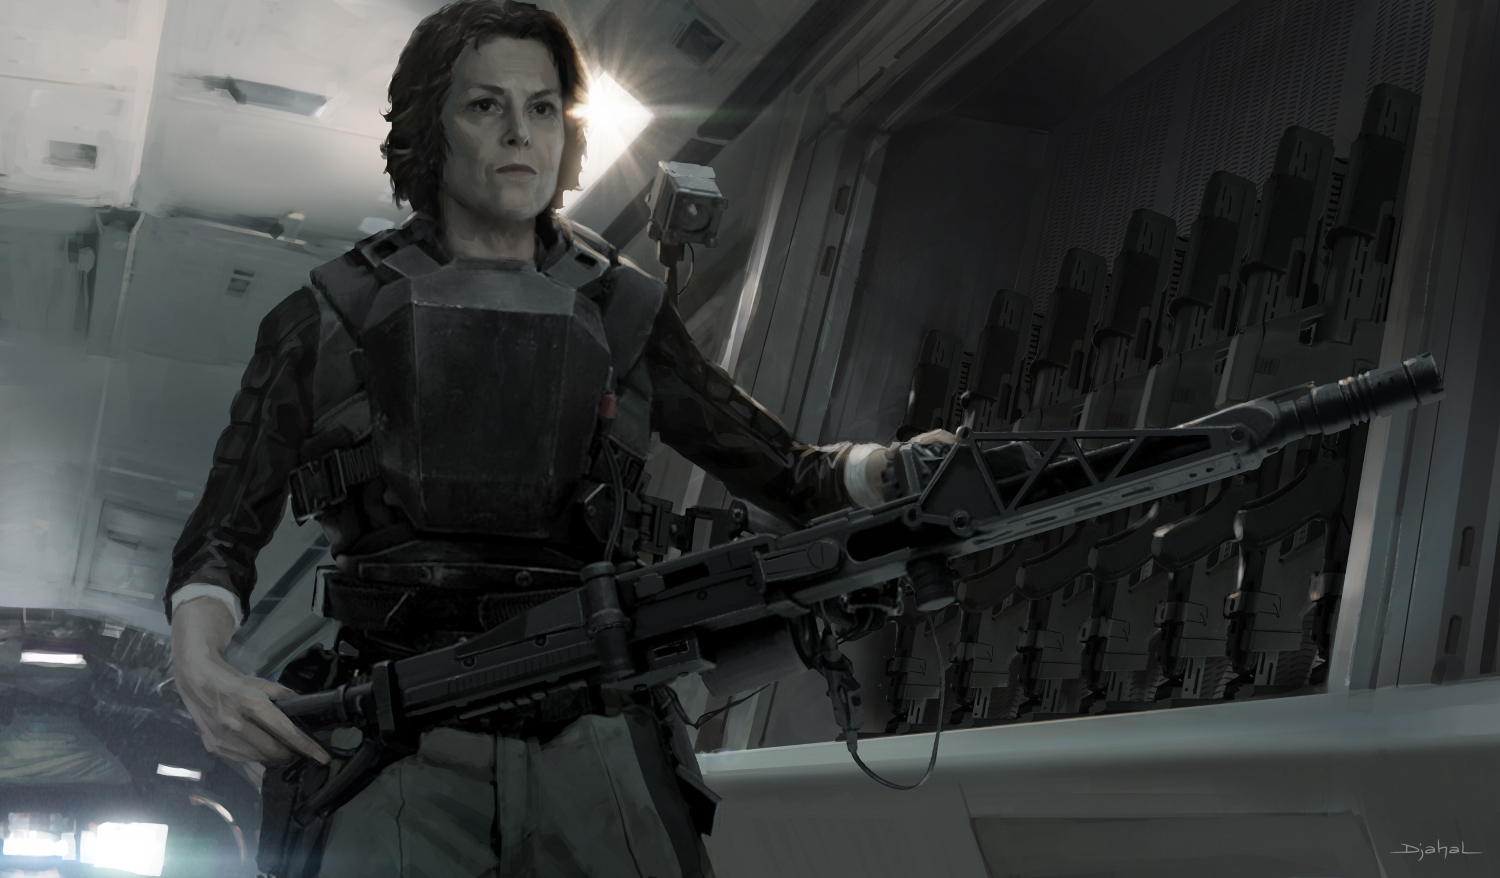 Alien&#39; Series Creator Noah Hawley Wanted To Watch Neill Blomkamp&#39;s &#39;Alien 5&#39; Movie; “I Would Have Paid Money To See That” – THE RONIN